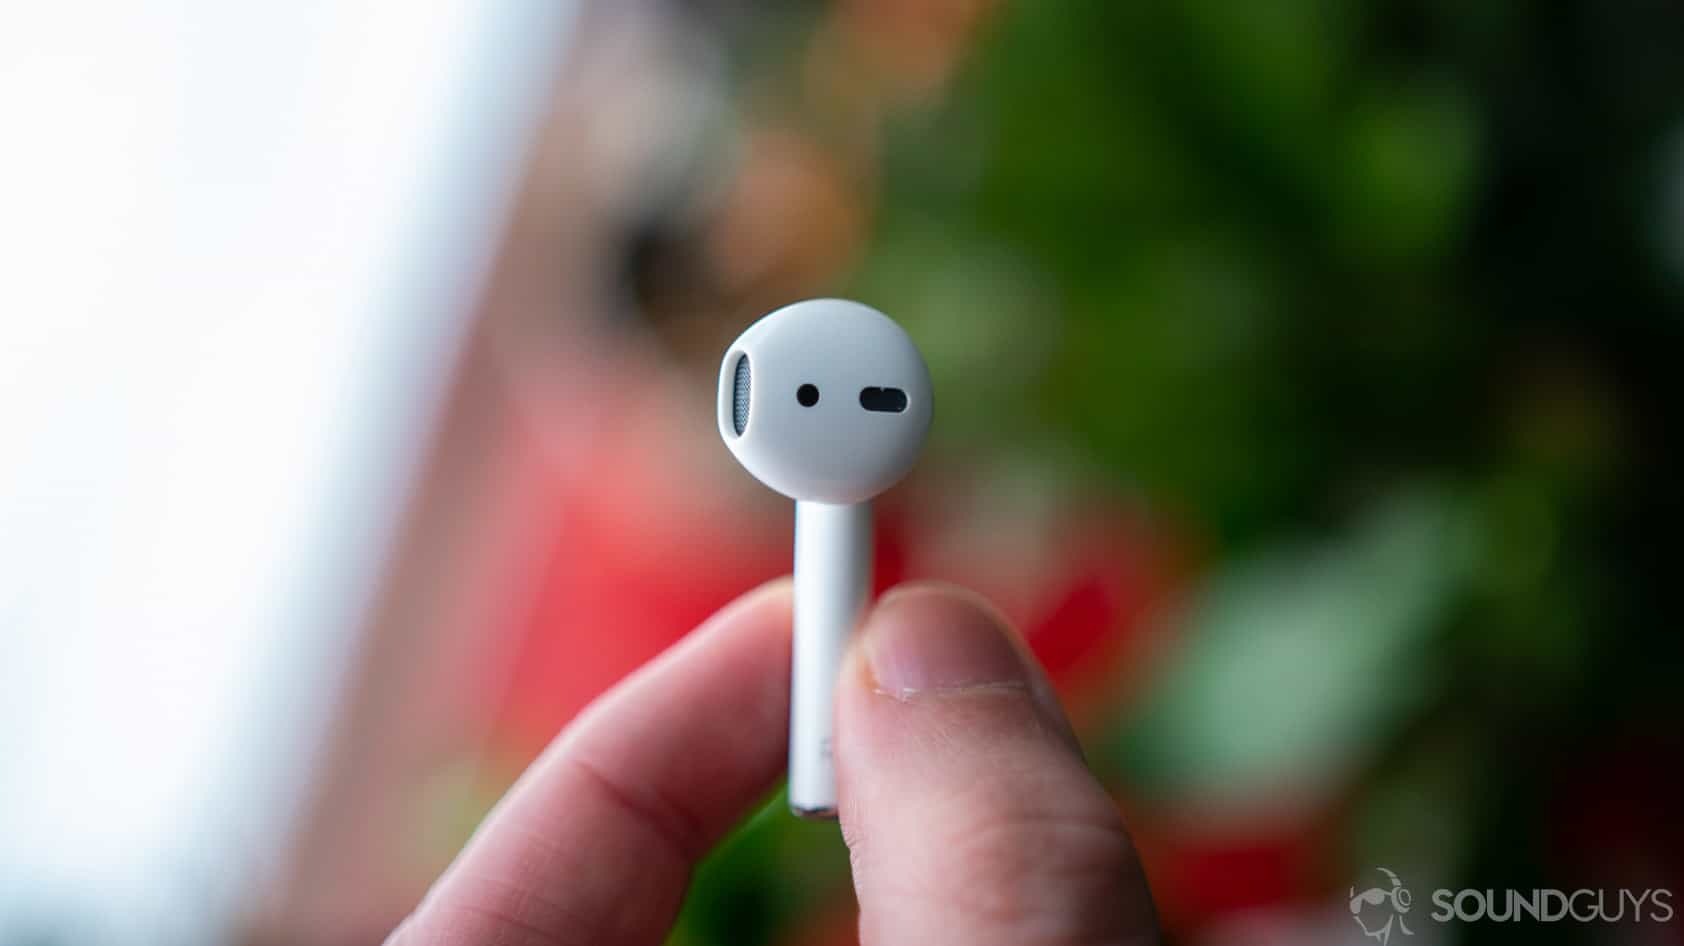 Apple's new AirPods with the right earbud between a man's fingers.